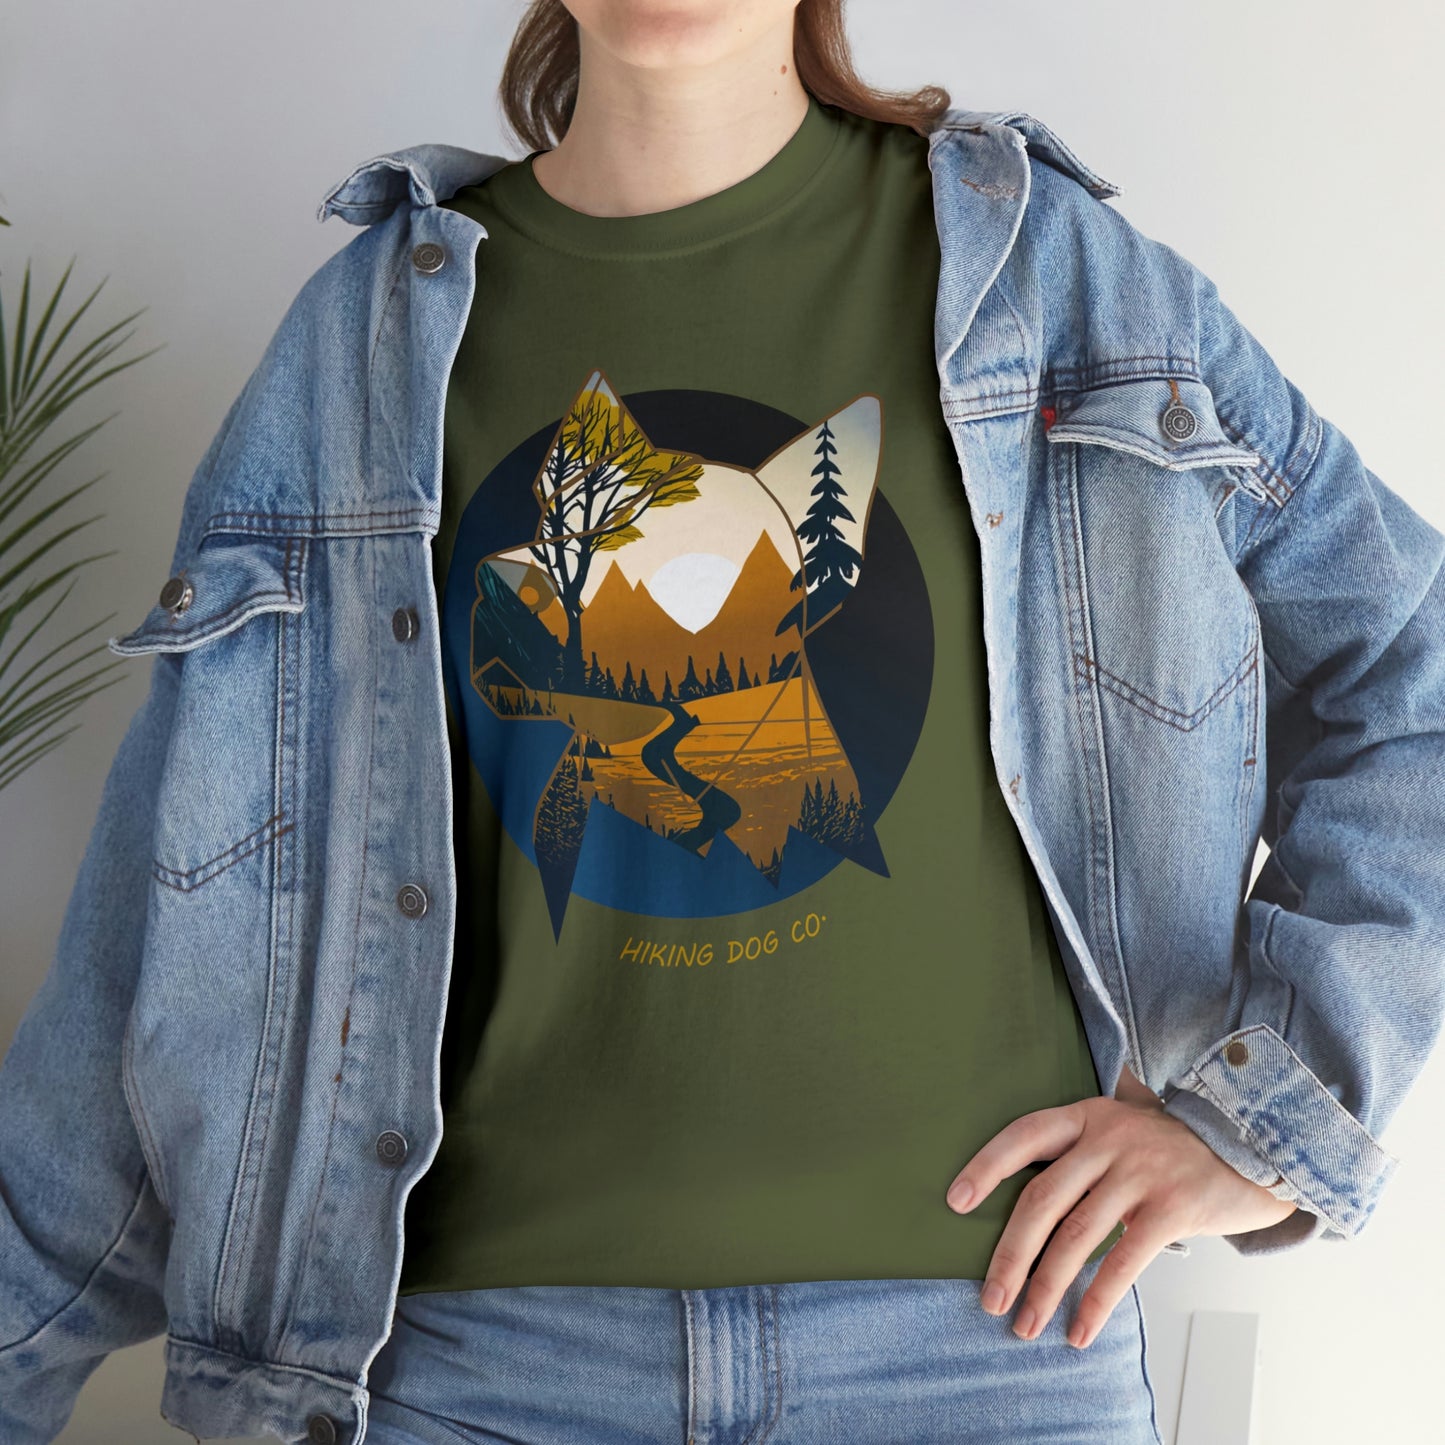 Mountain Trails and Dogs Unisex T-shirt